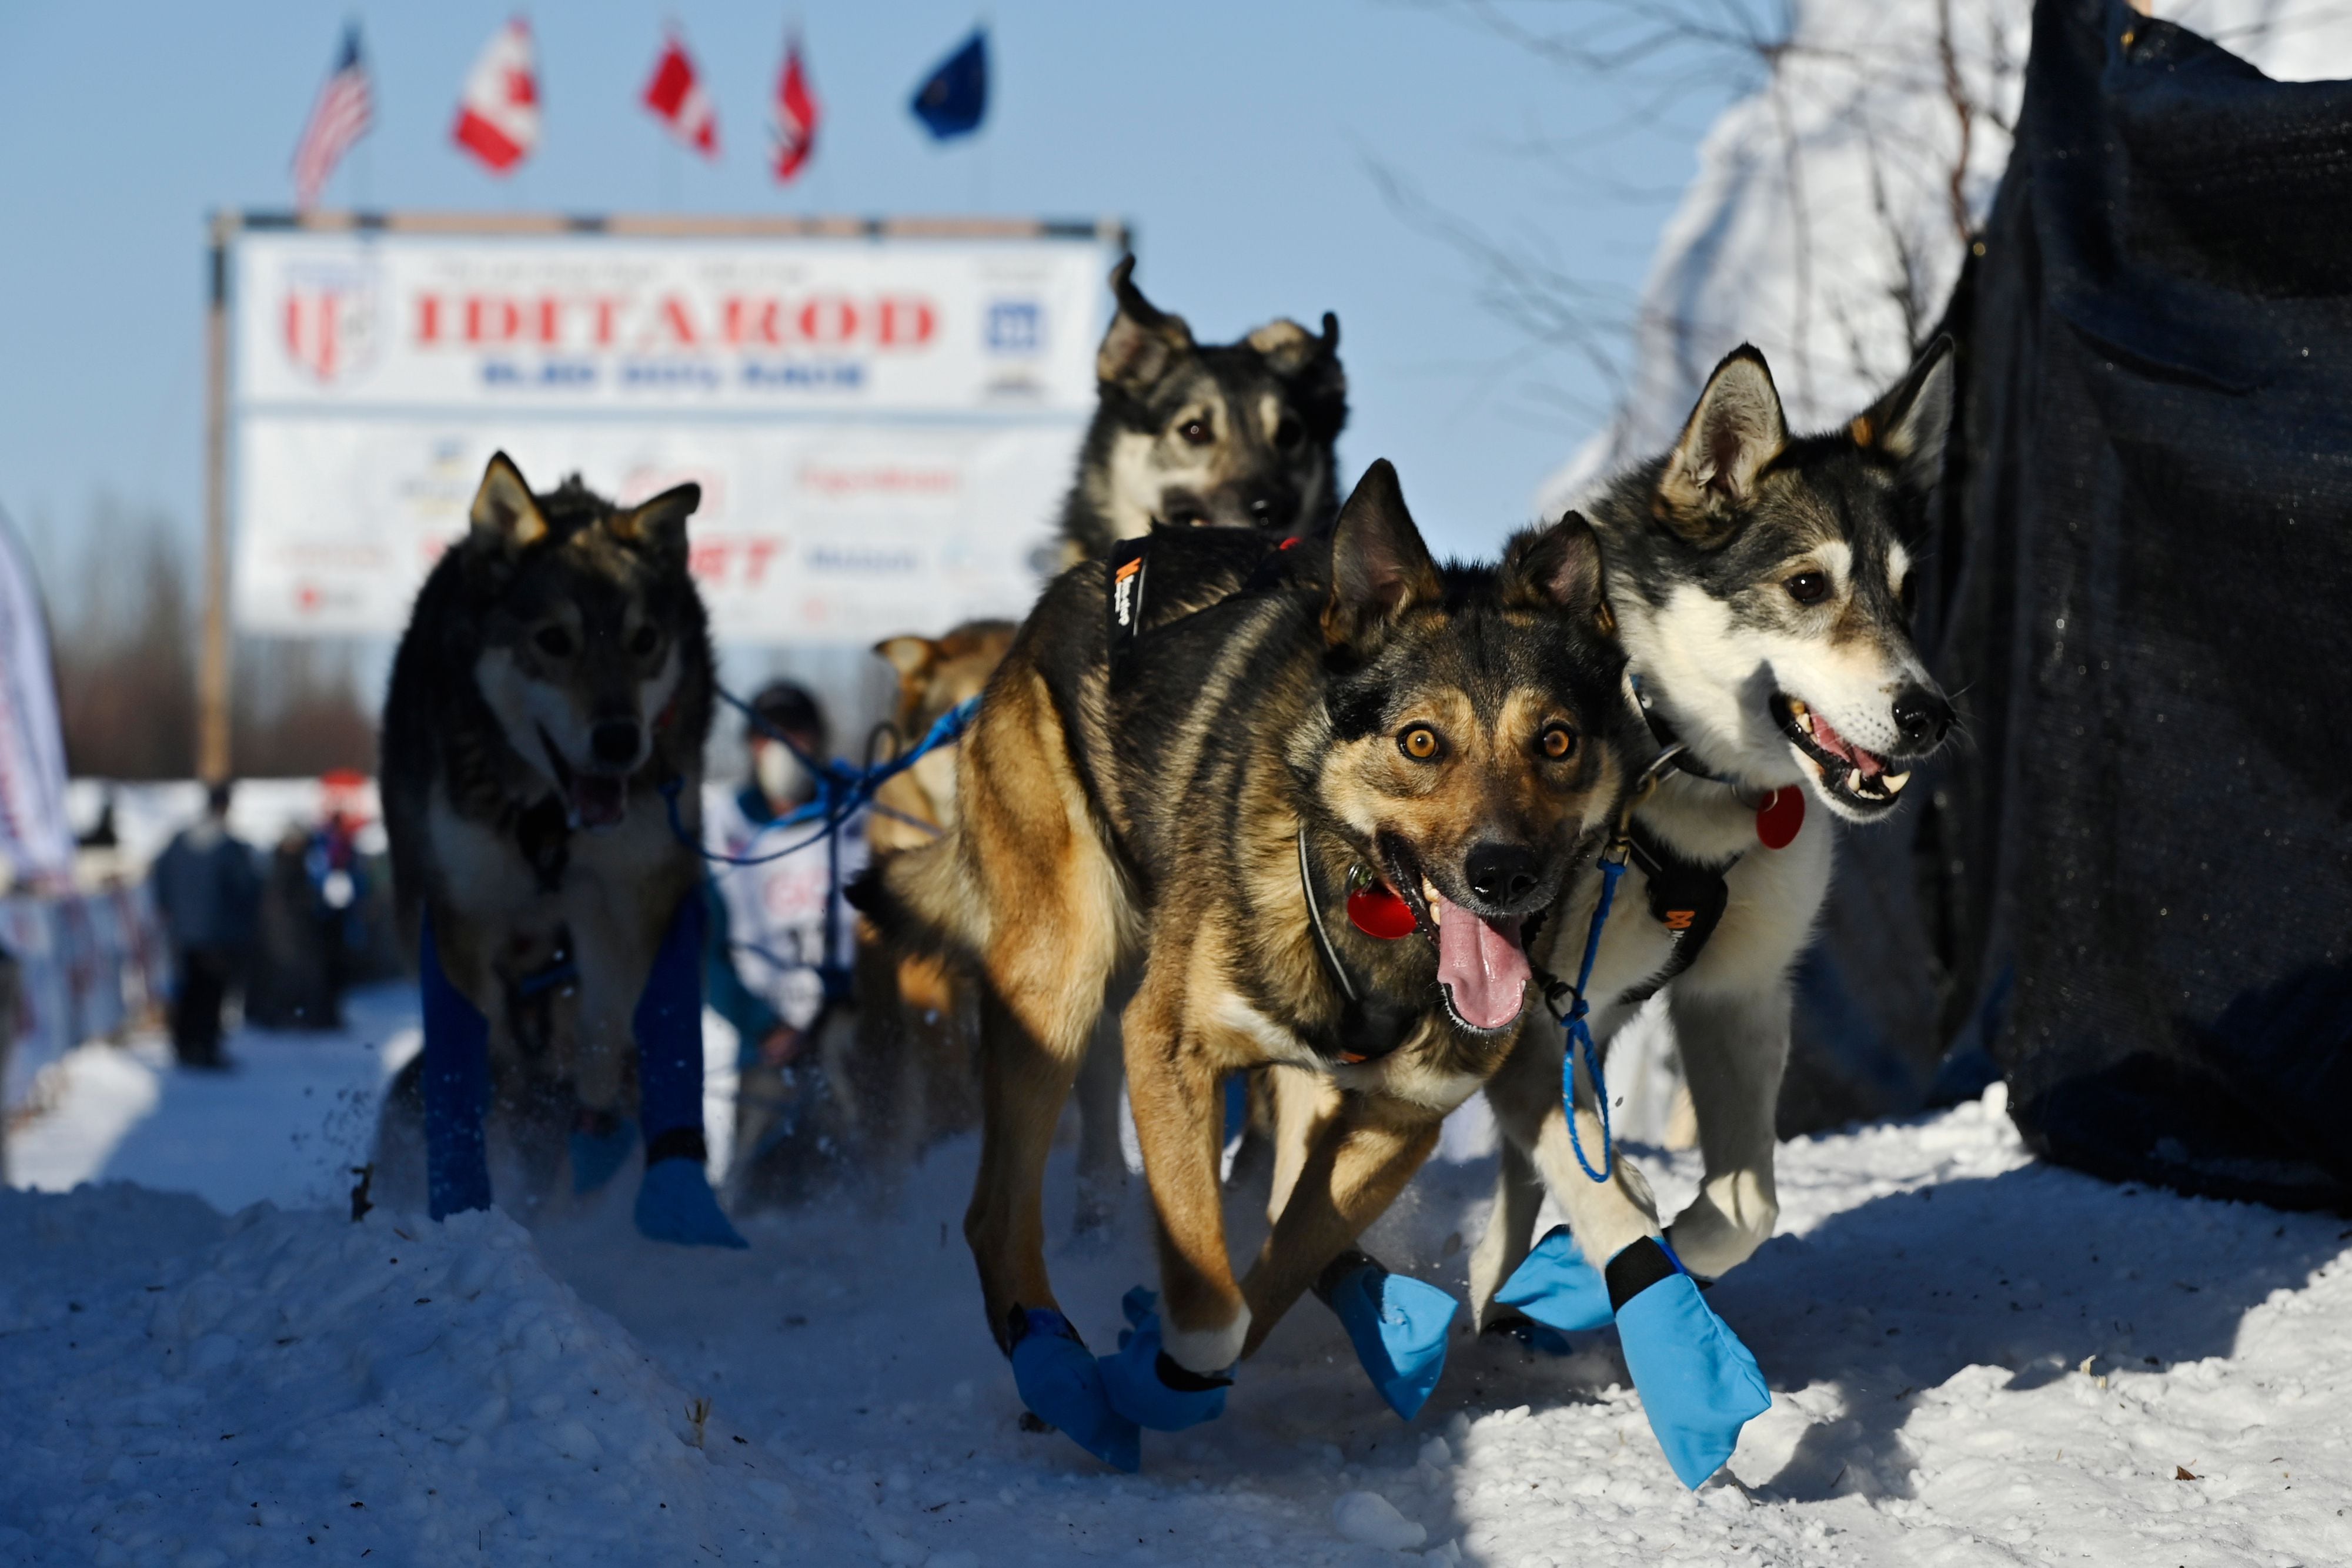 Iditarod 2022 Schedule Iditarod 2022: After Two Pandemic Years, This Year's Race To Nome Should  Look Mostly Normal. Here's What That Means.